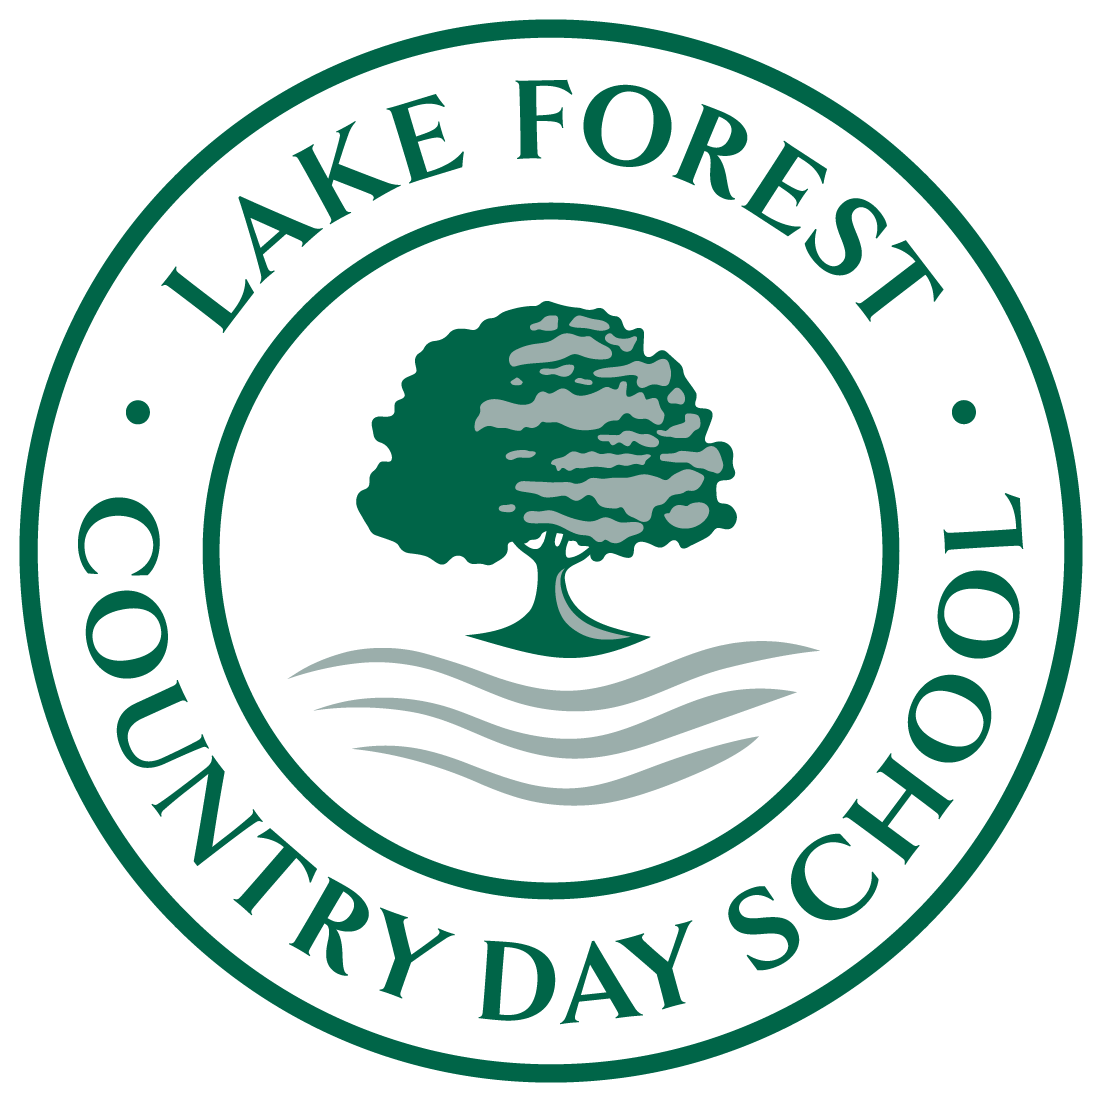 Lake Forest Country Day School